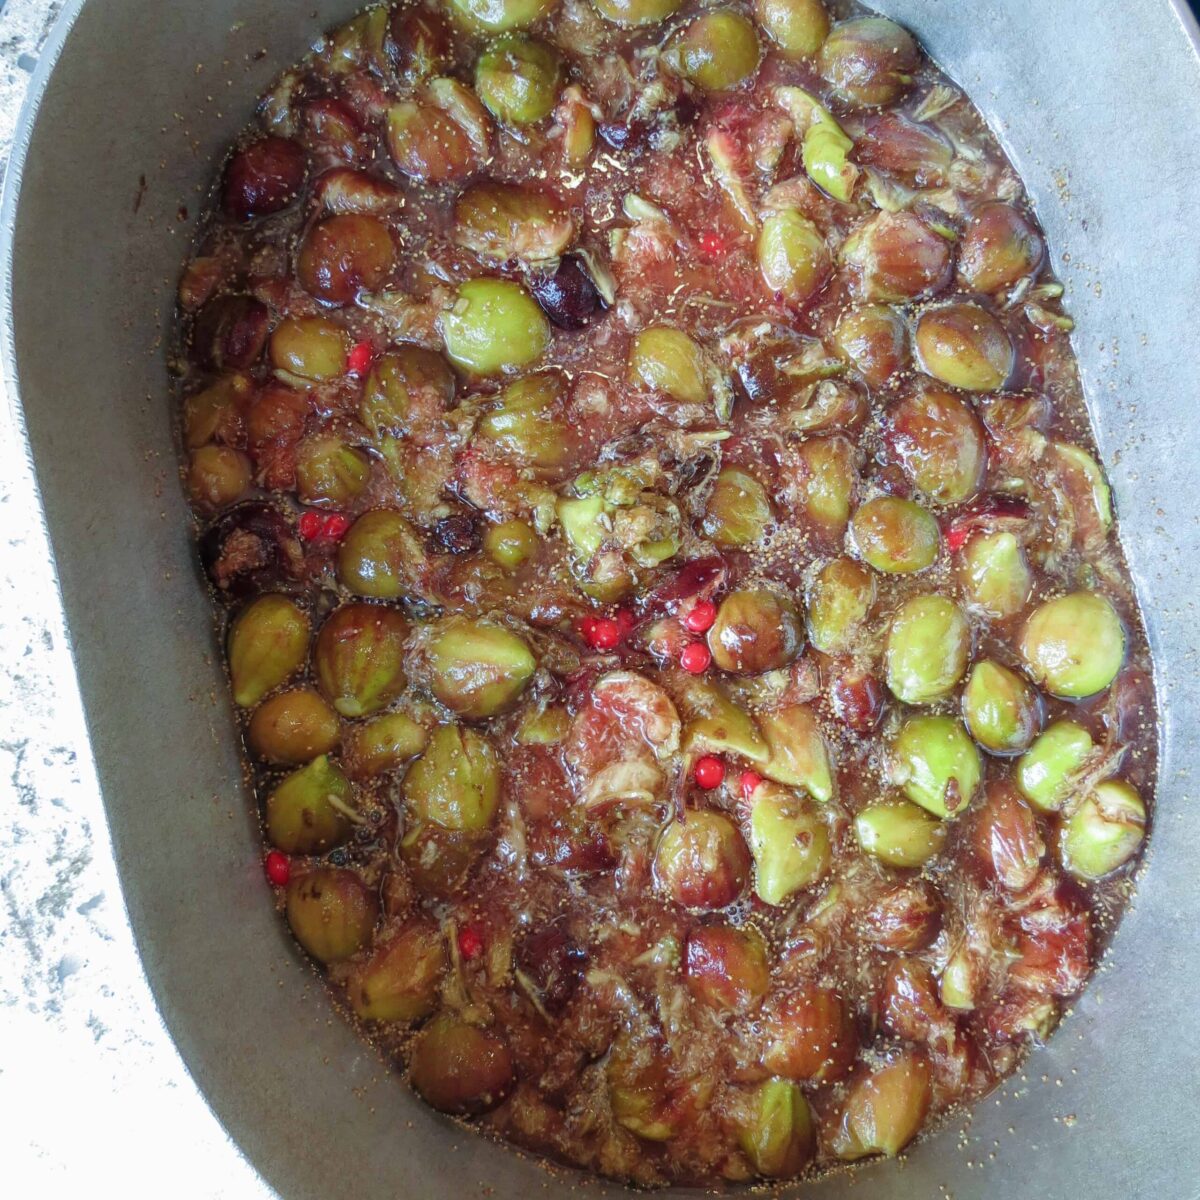 A large pot of crushed figs cooking with red hot candies.